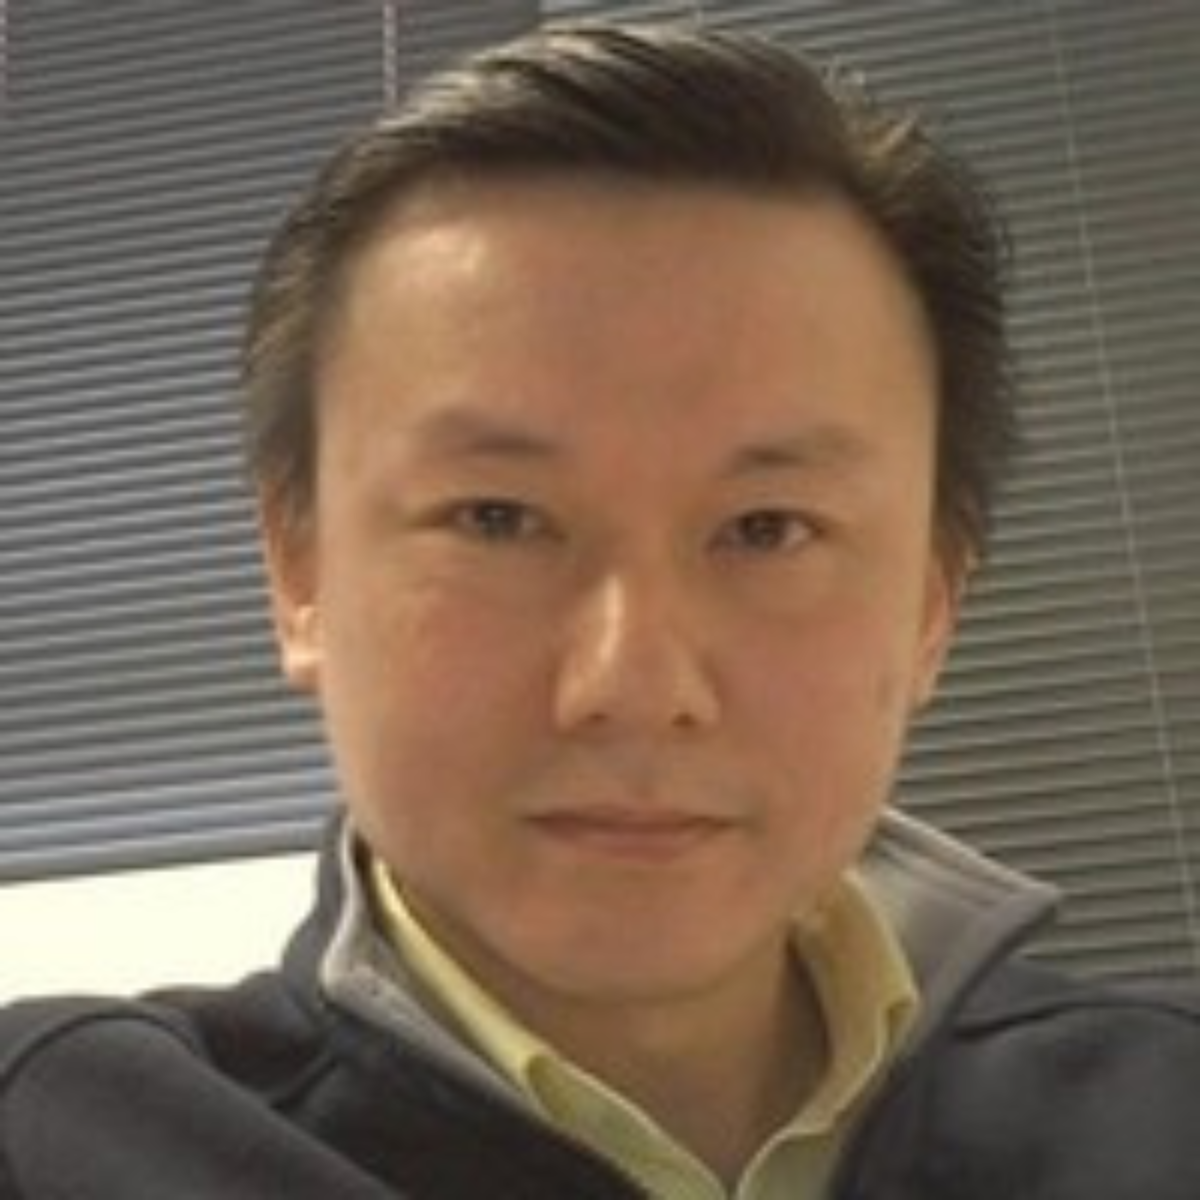 Sensear Appoints William Choo as Director of Operations & Engineering